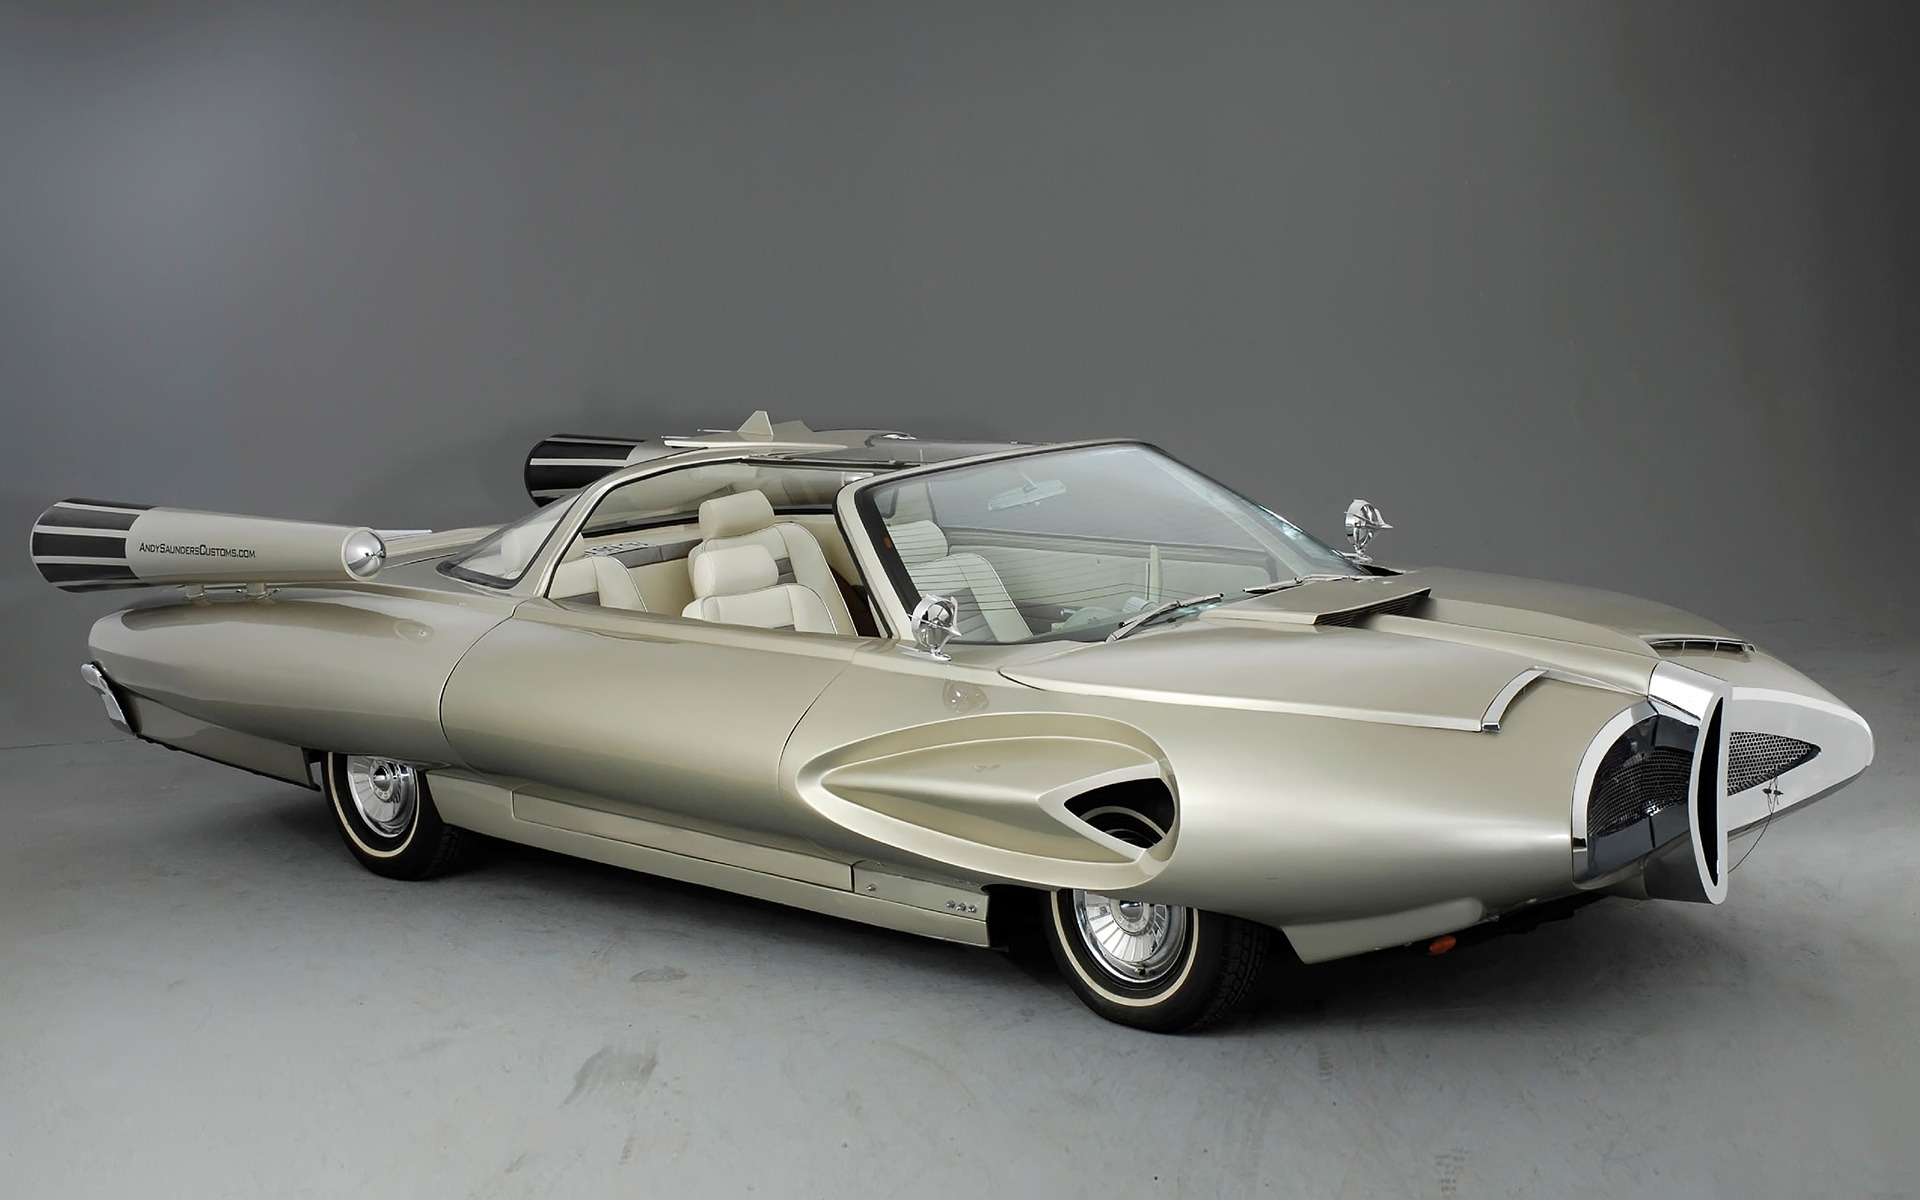 Ford X 2000 Concept Car 1958 for 1920 x 1200 widescreen resolution